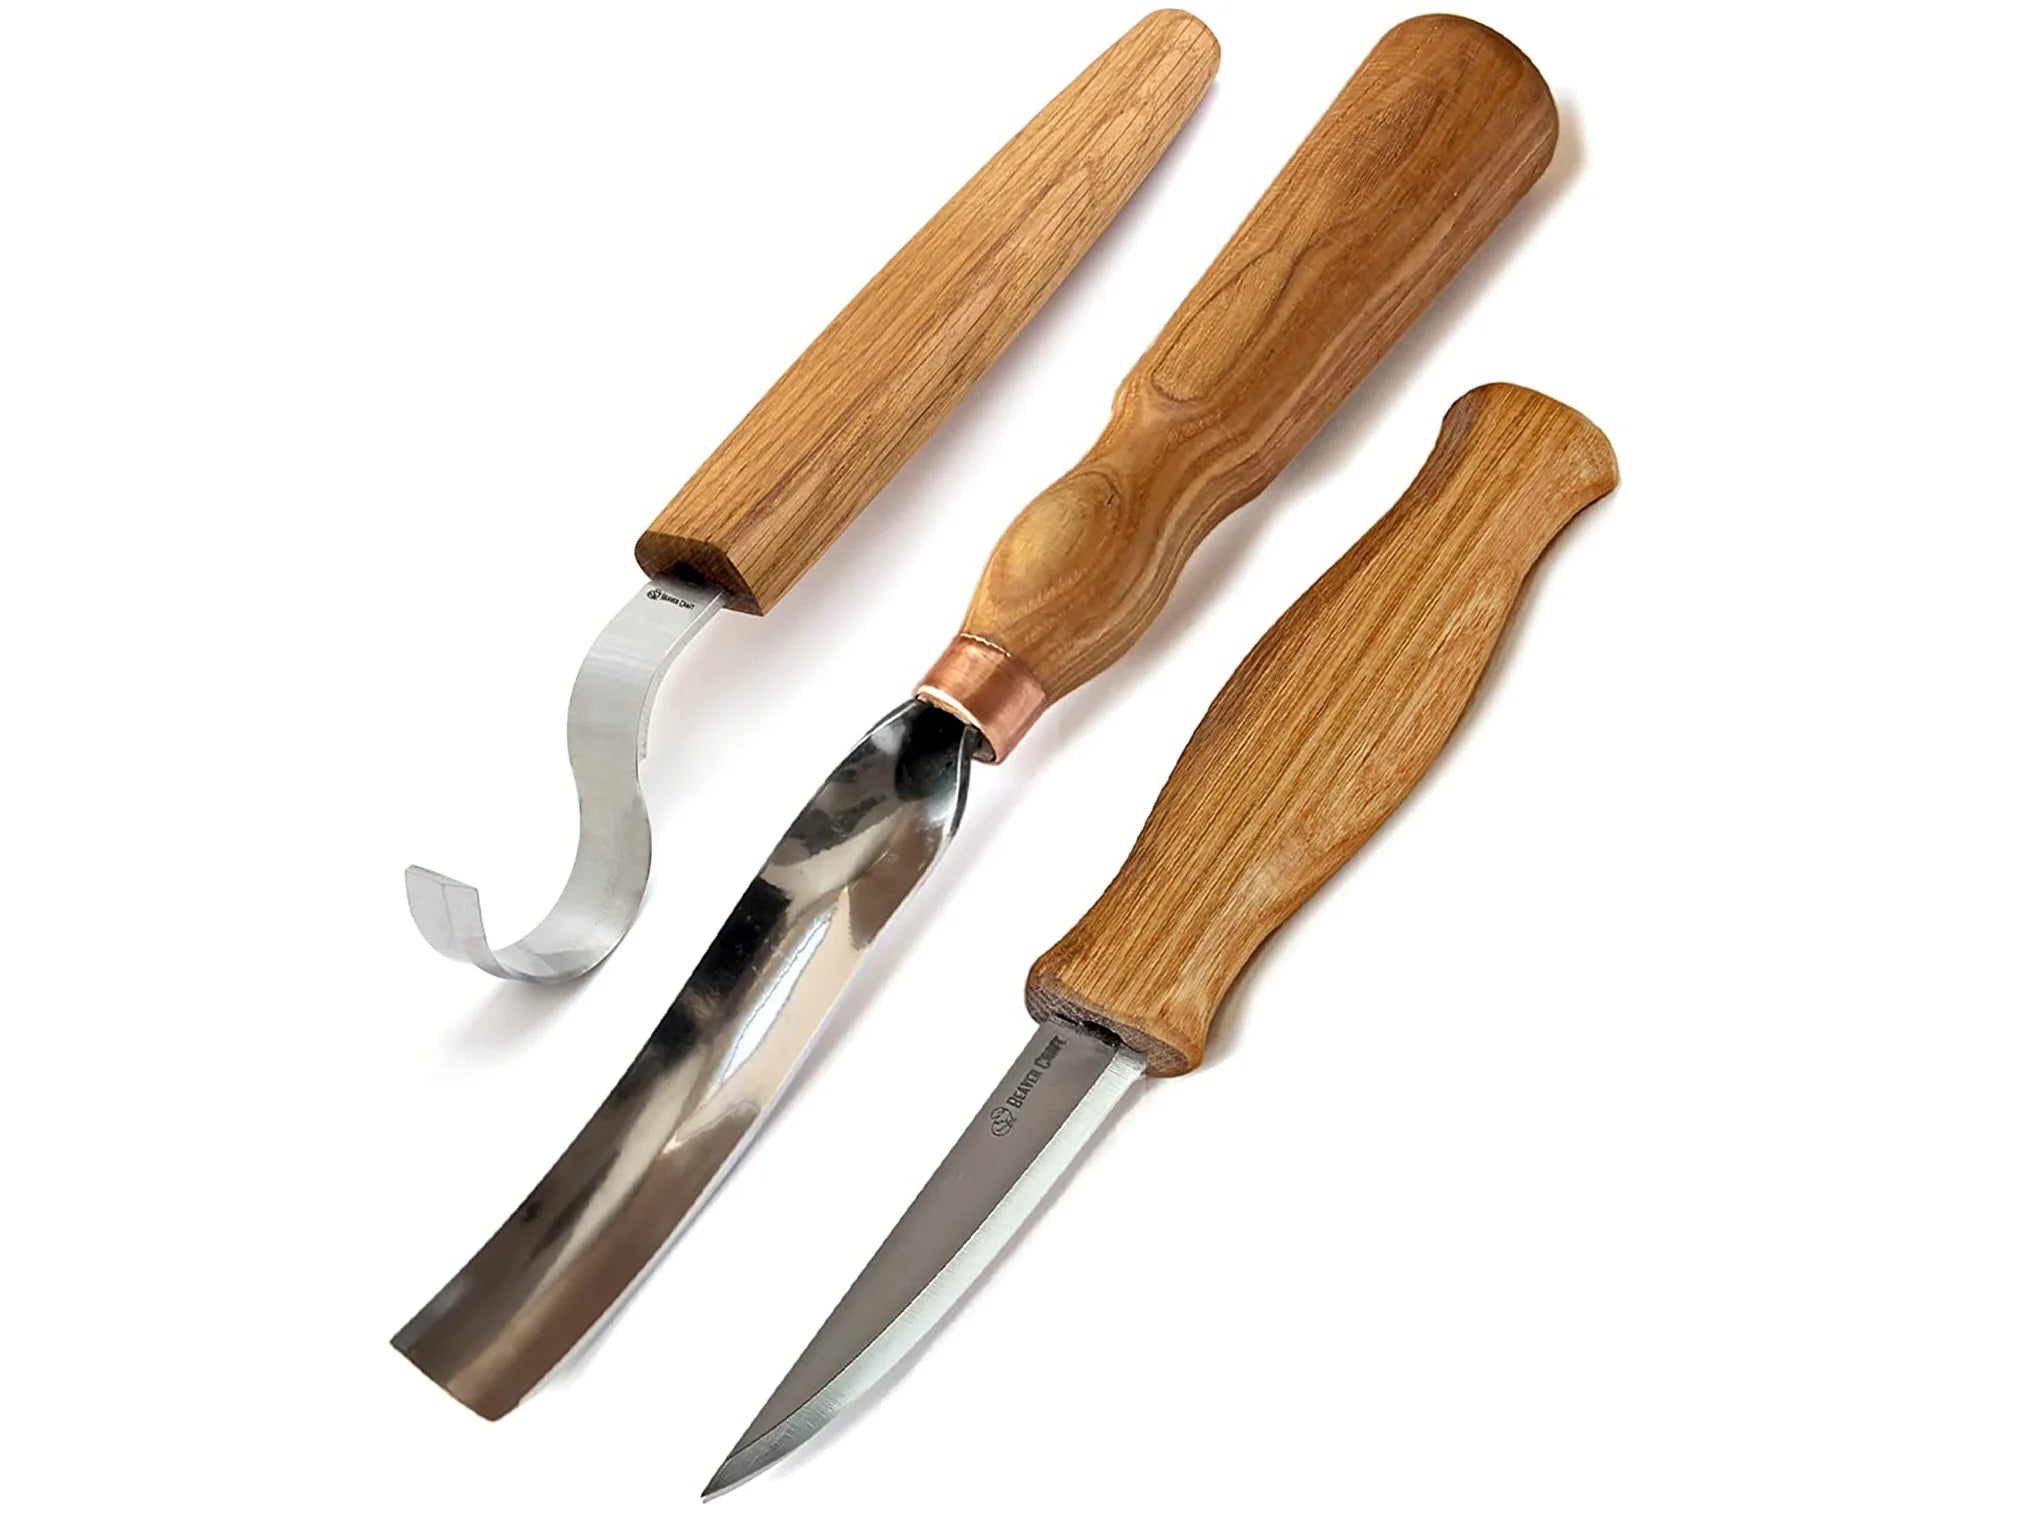 Schaaf Wood Carving Tools Deluxe Wood Carving Kit | Includes Detail Knife, Chip Carving Knife, Sloyd Wood Carving Knife, Spoon Carving Kit | Adult